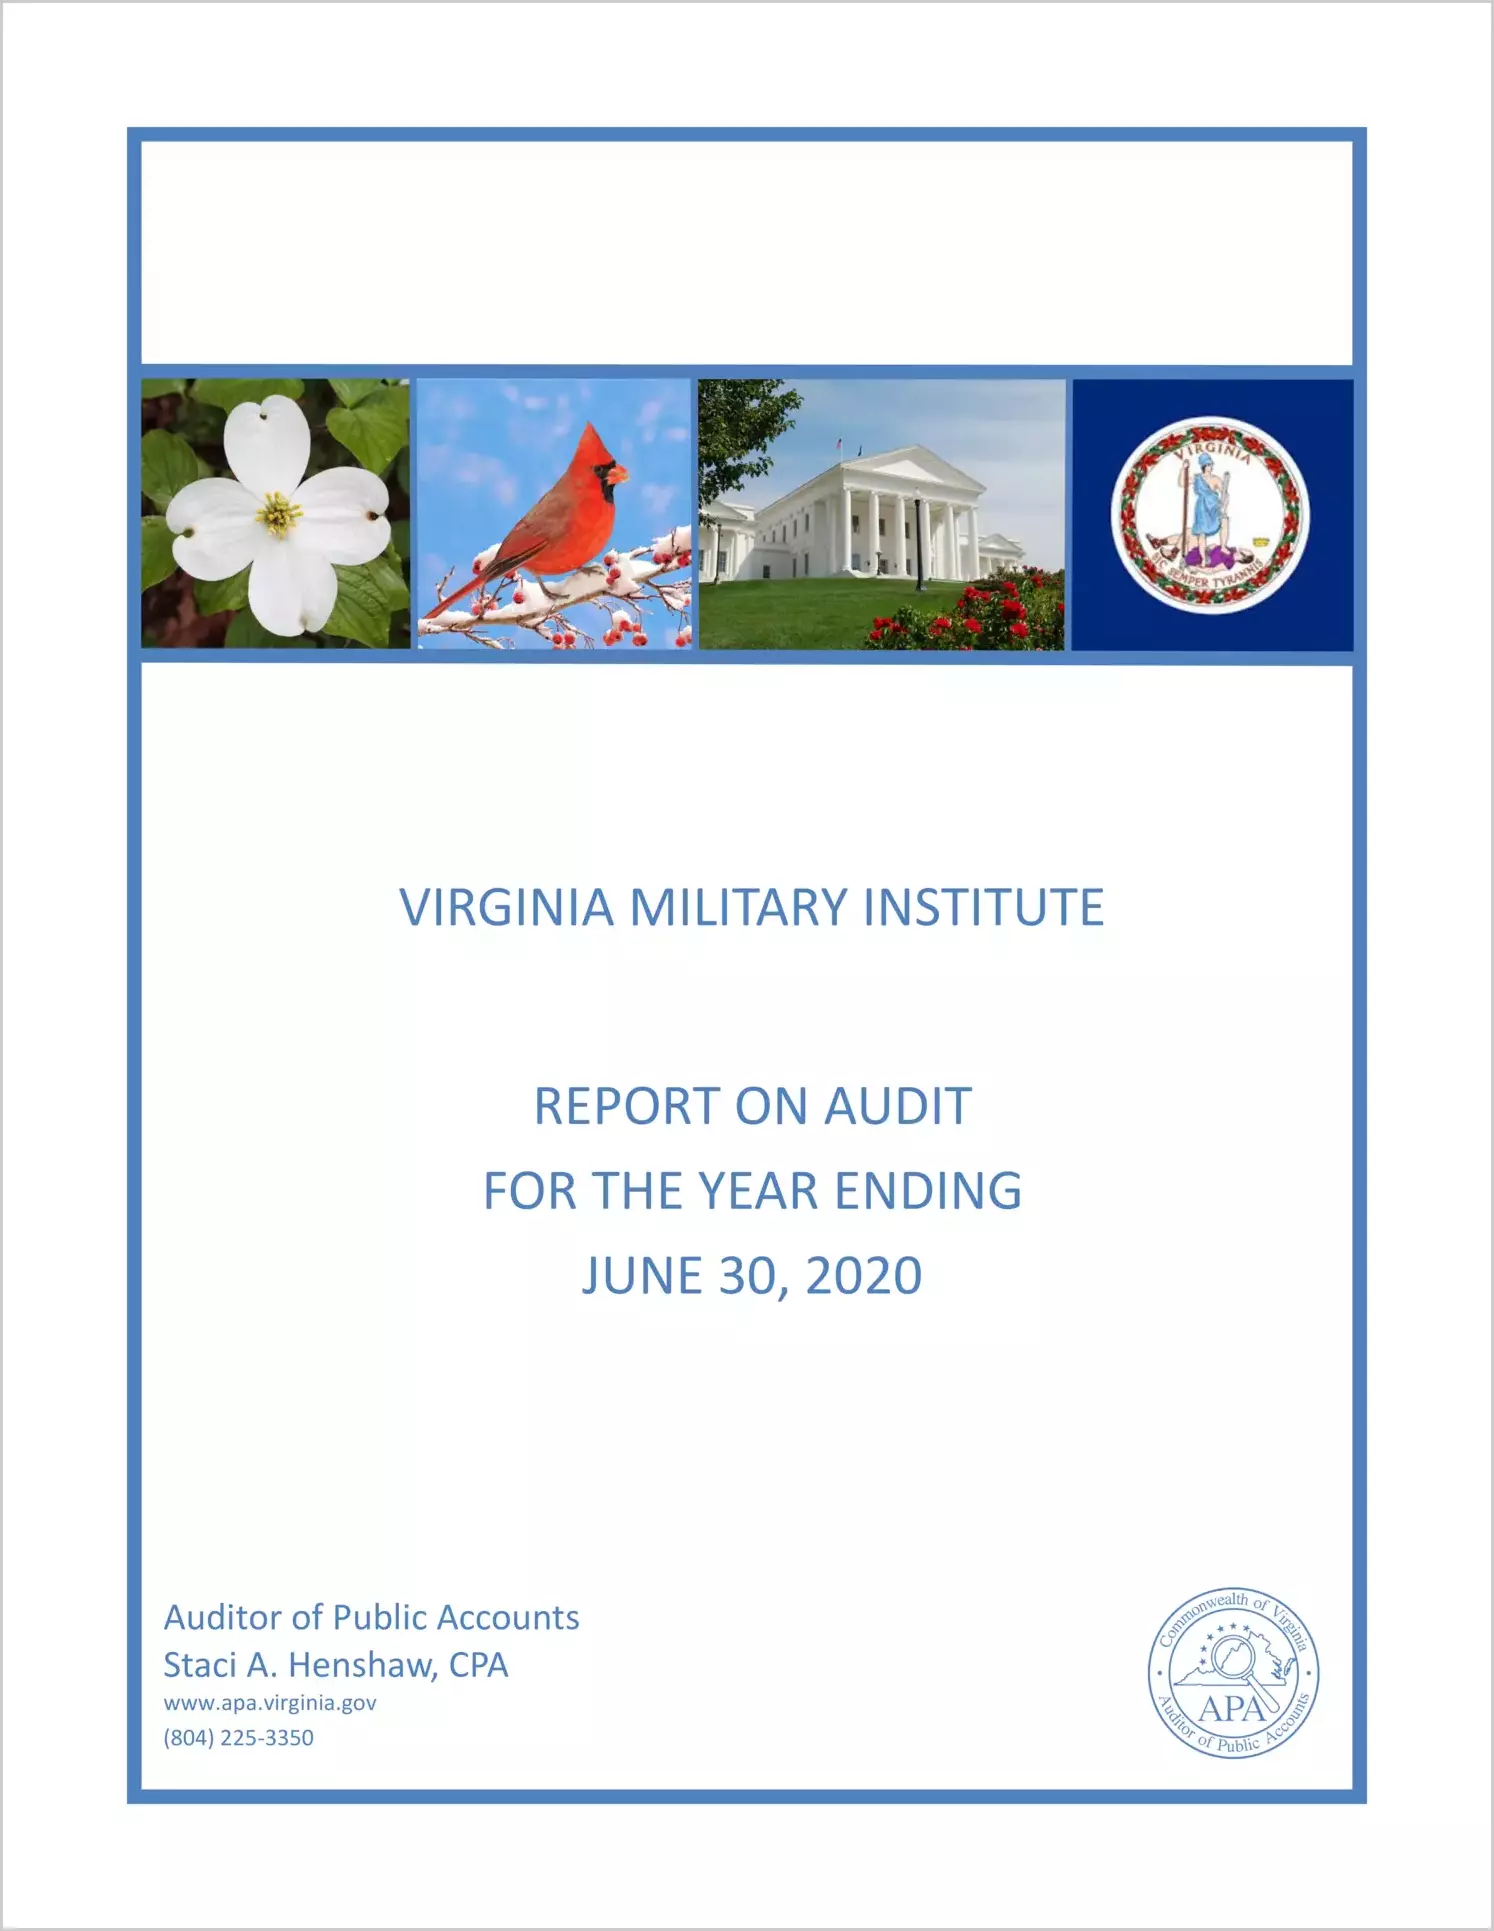 Virginia Military Institute for the year ending June 30, 2020